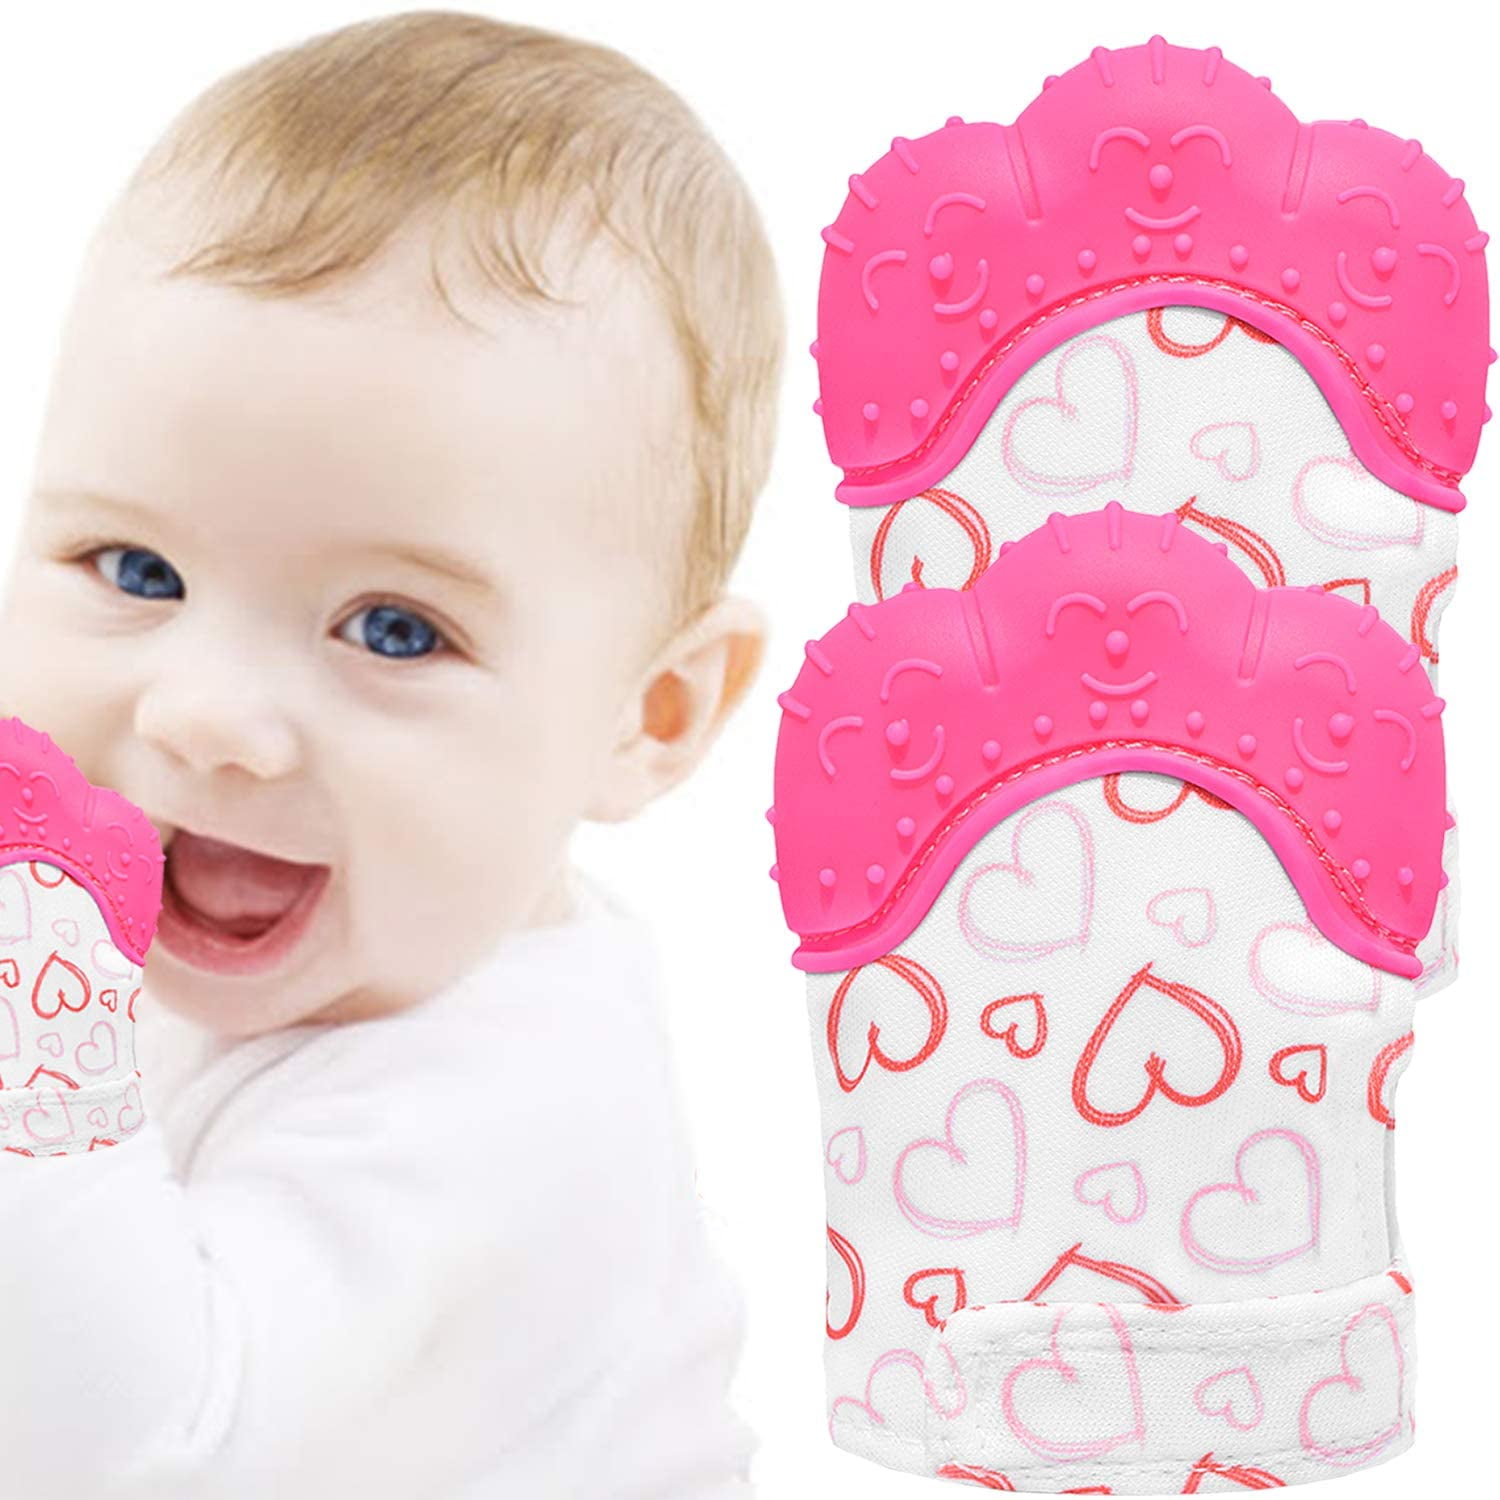 Self-Soothing Baby Teething Relief Mitten Baby Teething Mitten Toy for Boy and Girl BPA Free Soft Silicone Teething Toy for Baby CB's Top Products Sensory Crinkle Toy with Adjustable Strap Pink Baby Teething Toy 